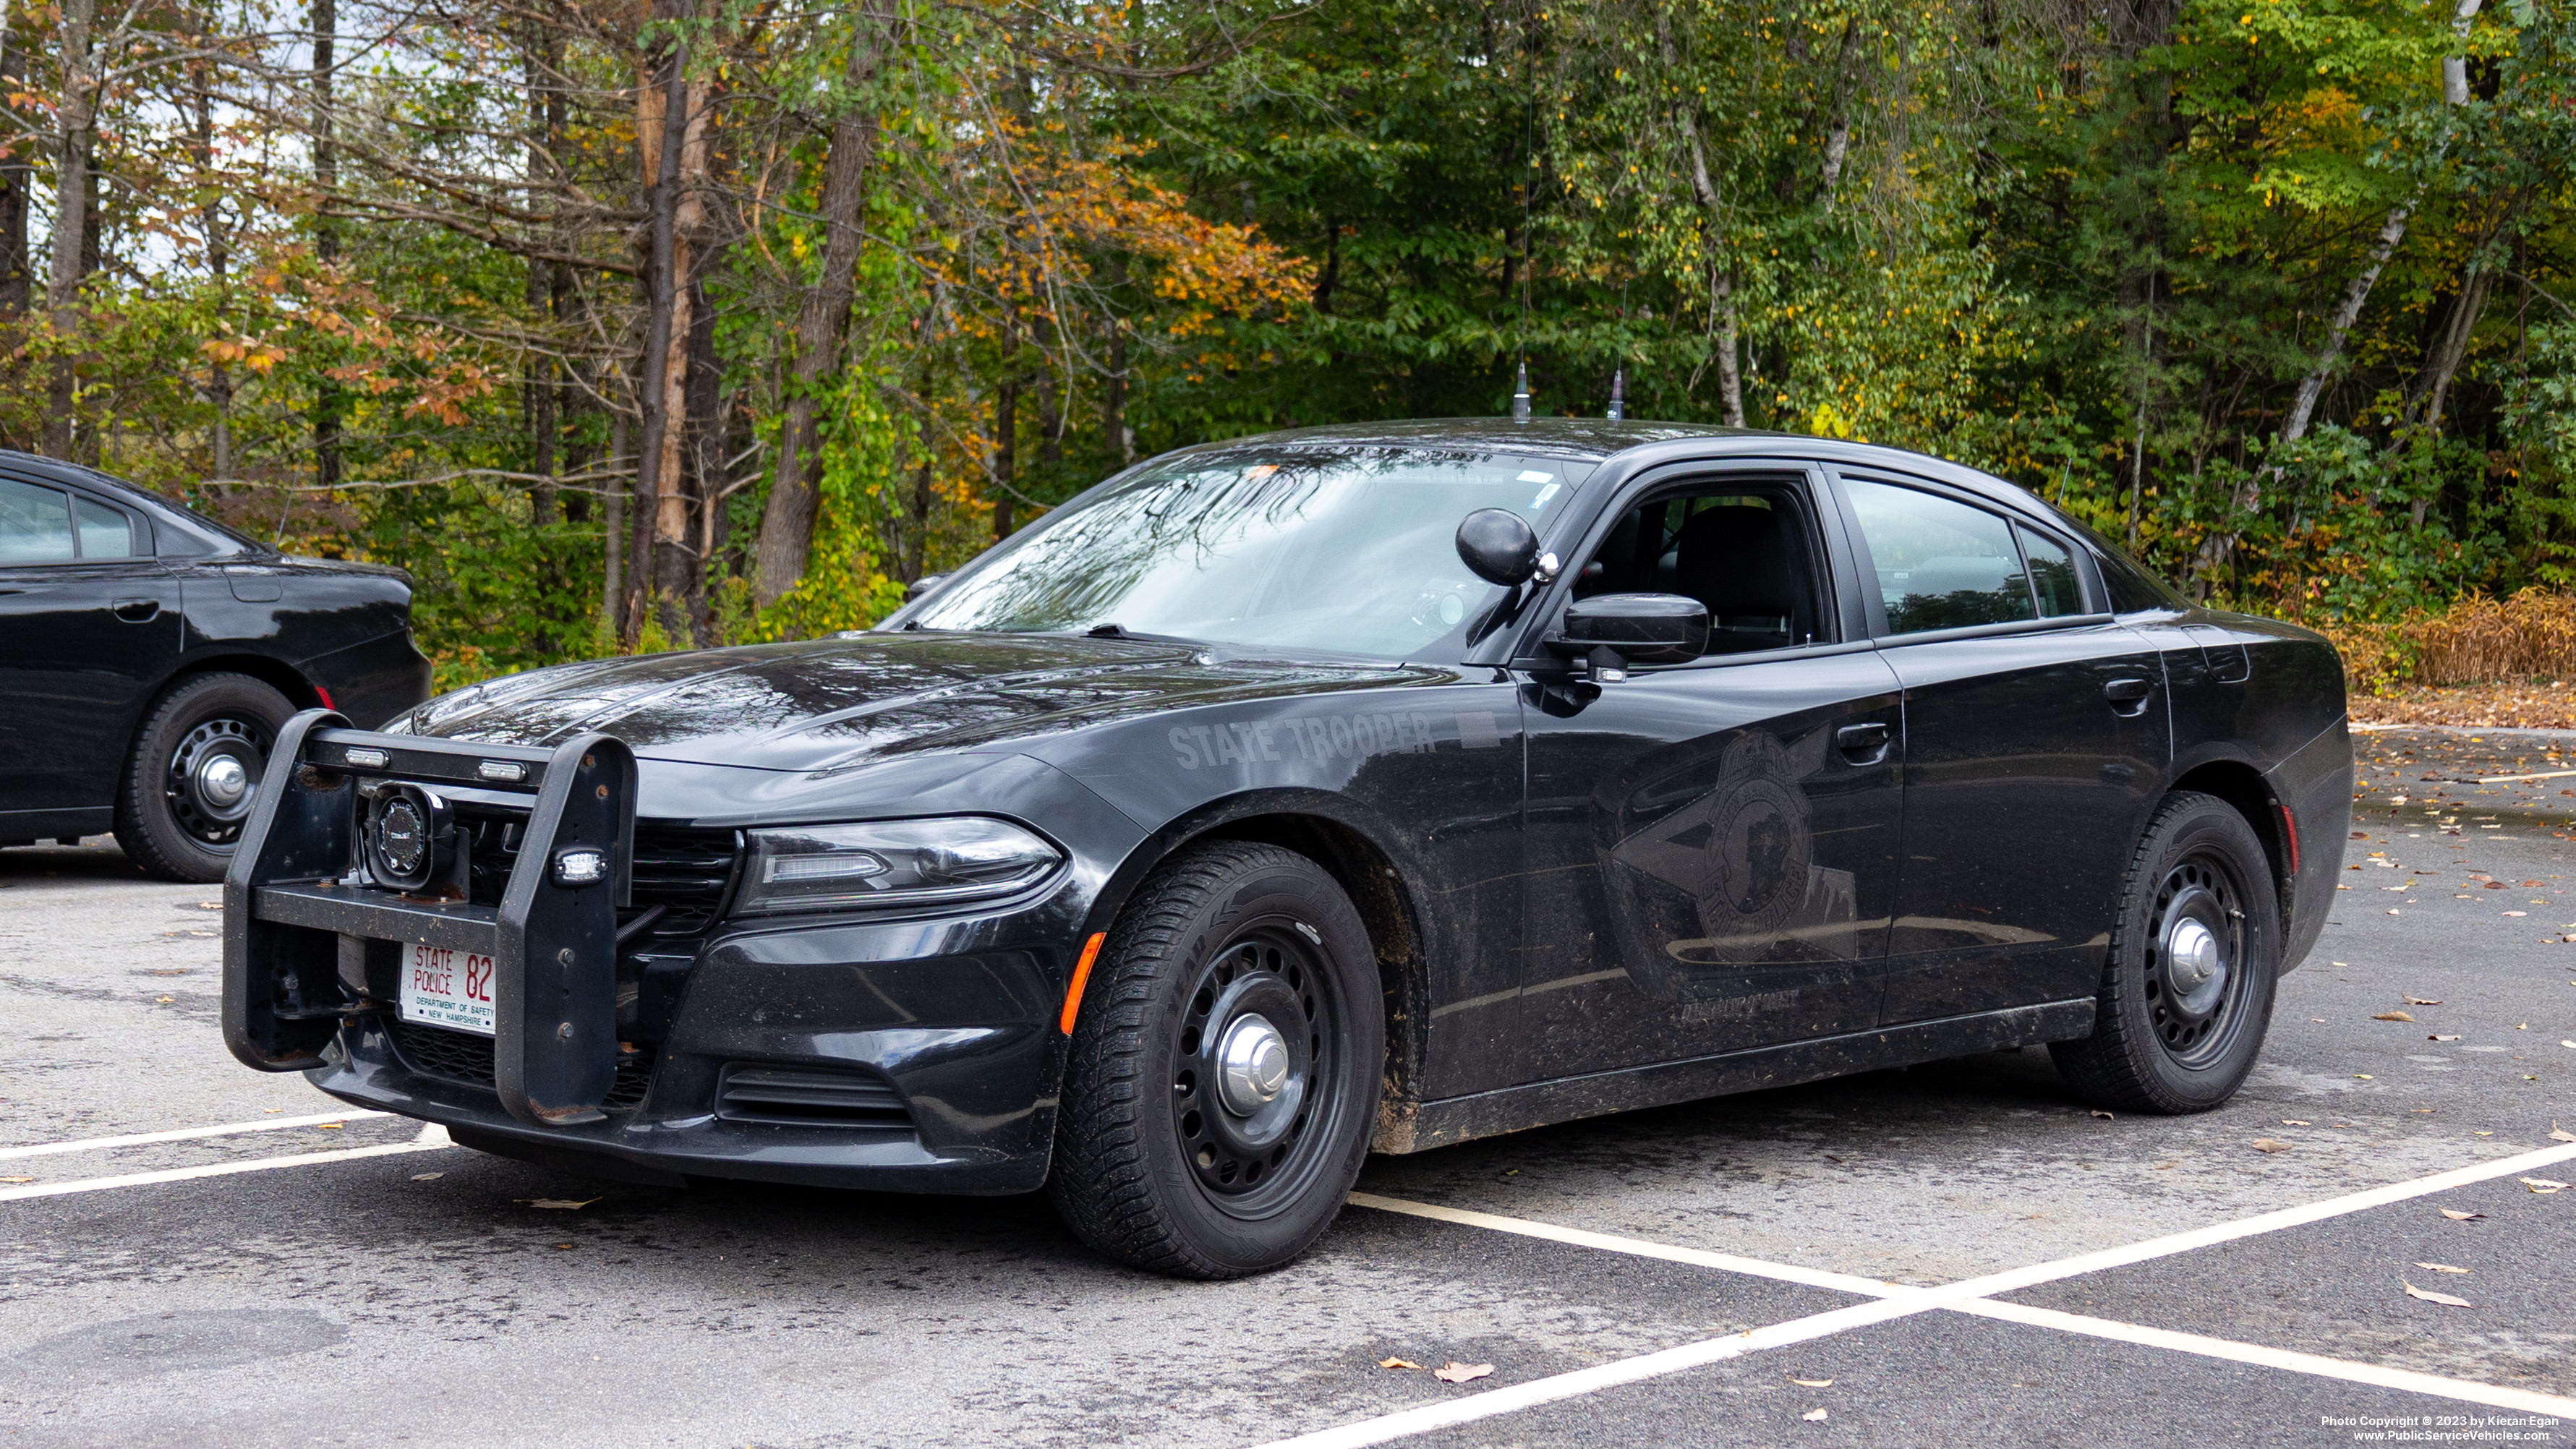 A photo  of New Hampshire State Police
            Cruiser 82, a 2017-2019 Dodge Charger             taken by Kieran Egan